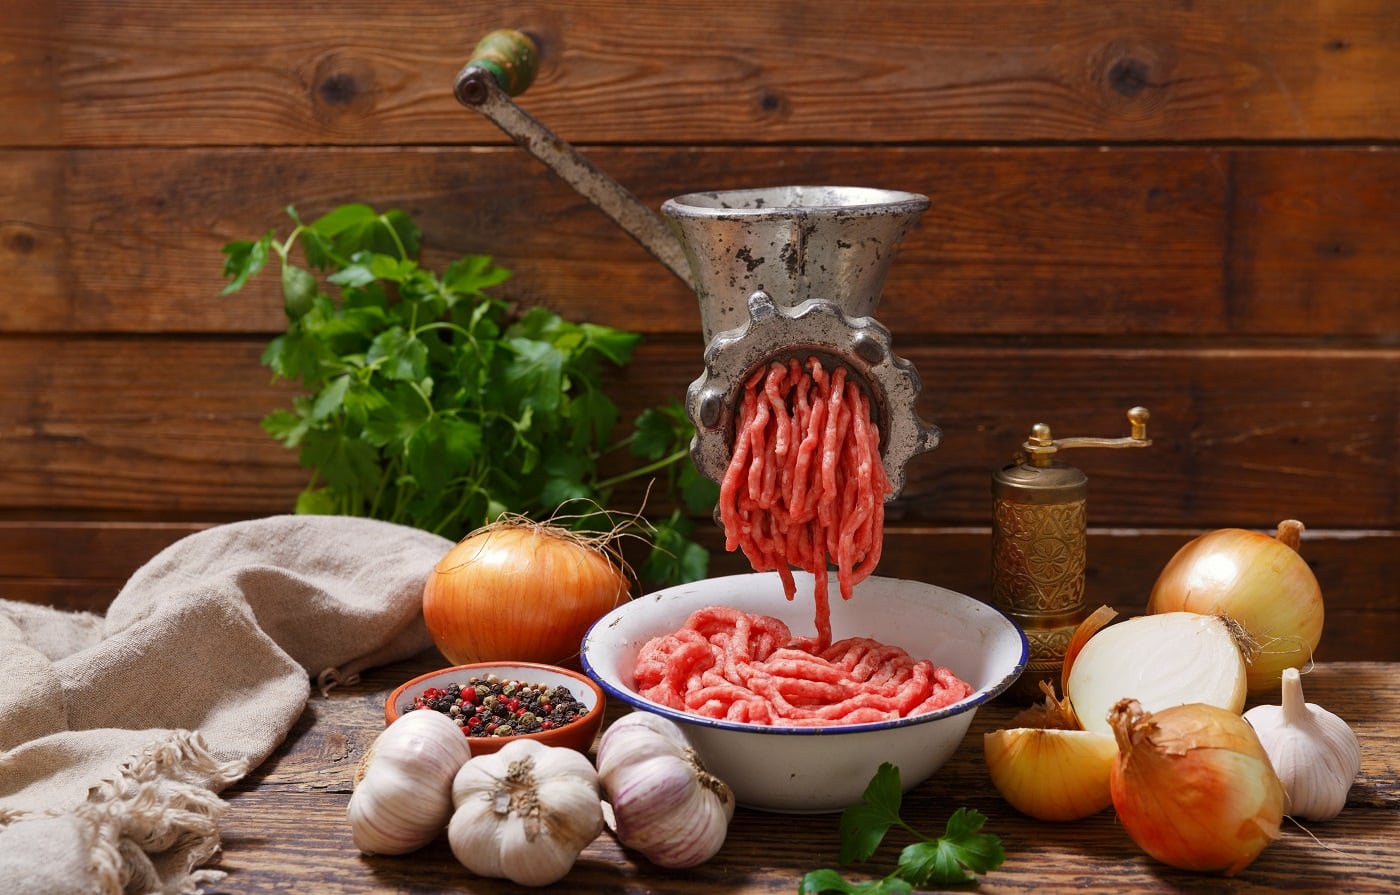 old meat grinder with minced meat and vegetables on wooden table